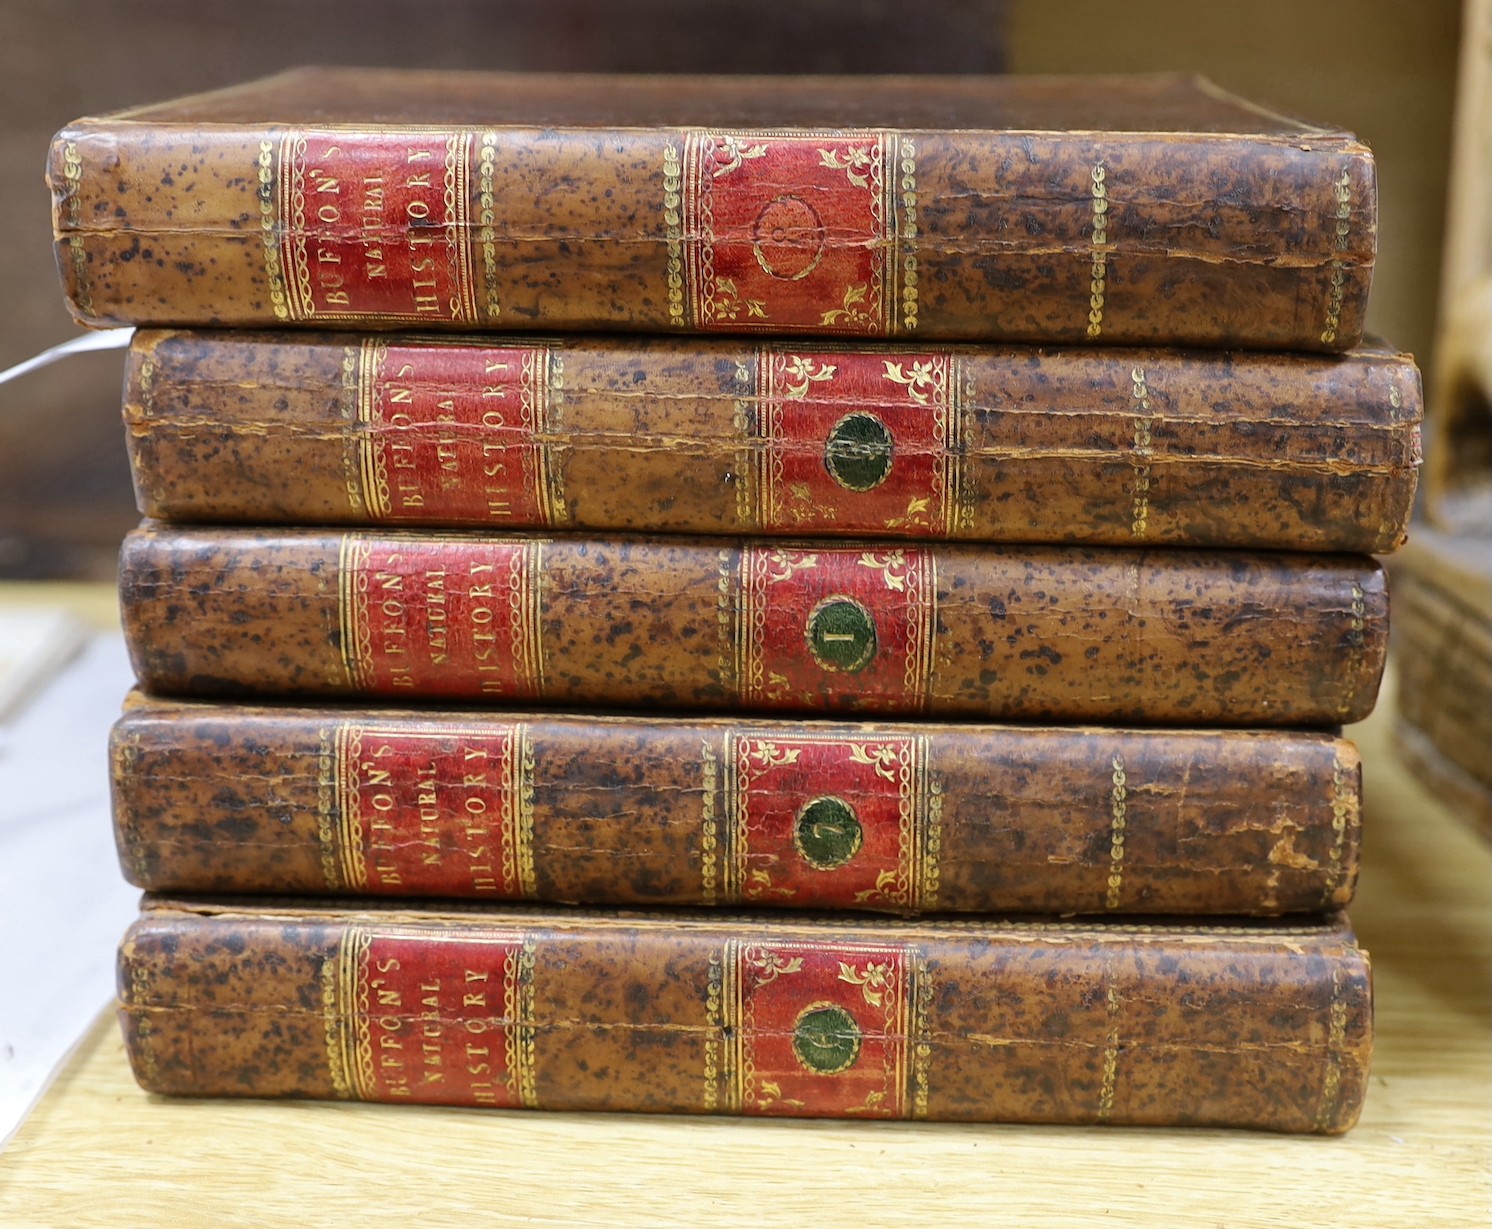 Barr's Buffon. Buffon's Natural History, containing a Theory of the Earth, a General History of Man.... With notes by the translator. 10 vols. 85 plates; contemp. gilt tree calf with red labels, cr. 8vo. printed by J.S.